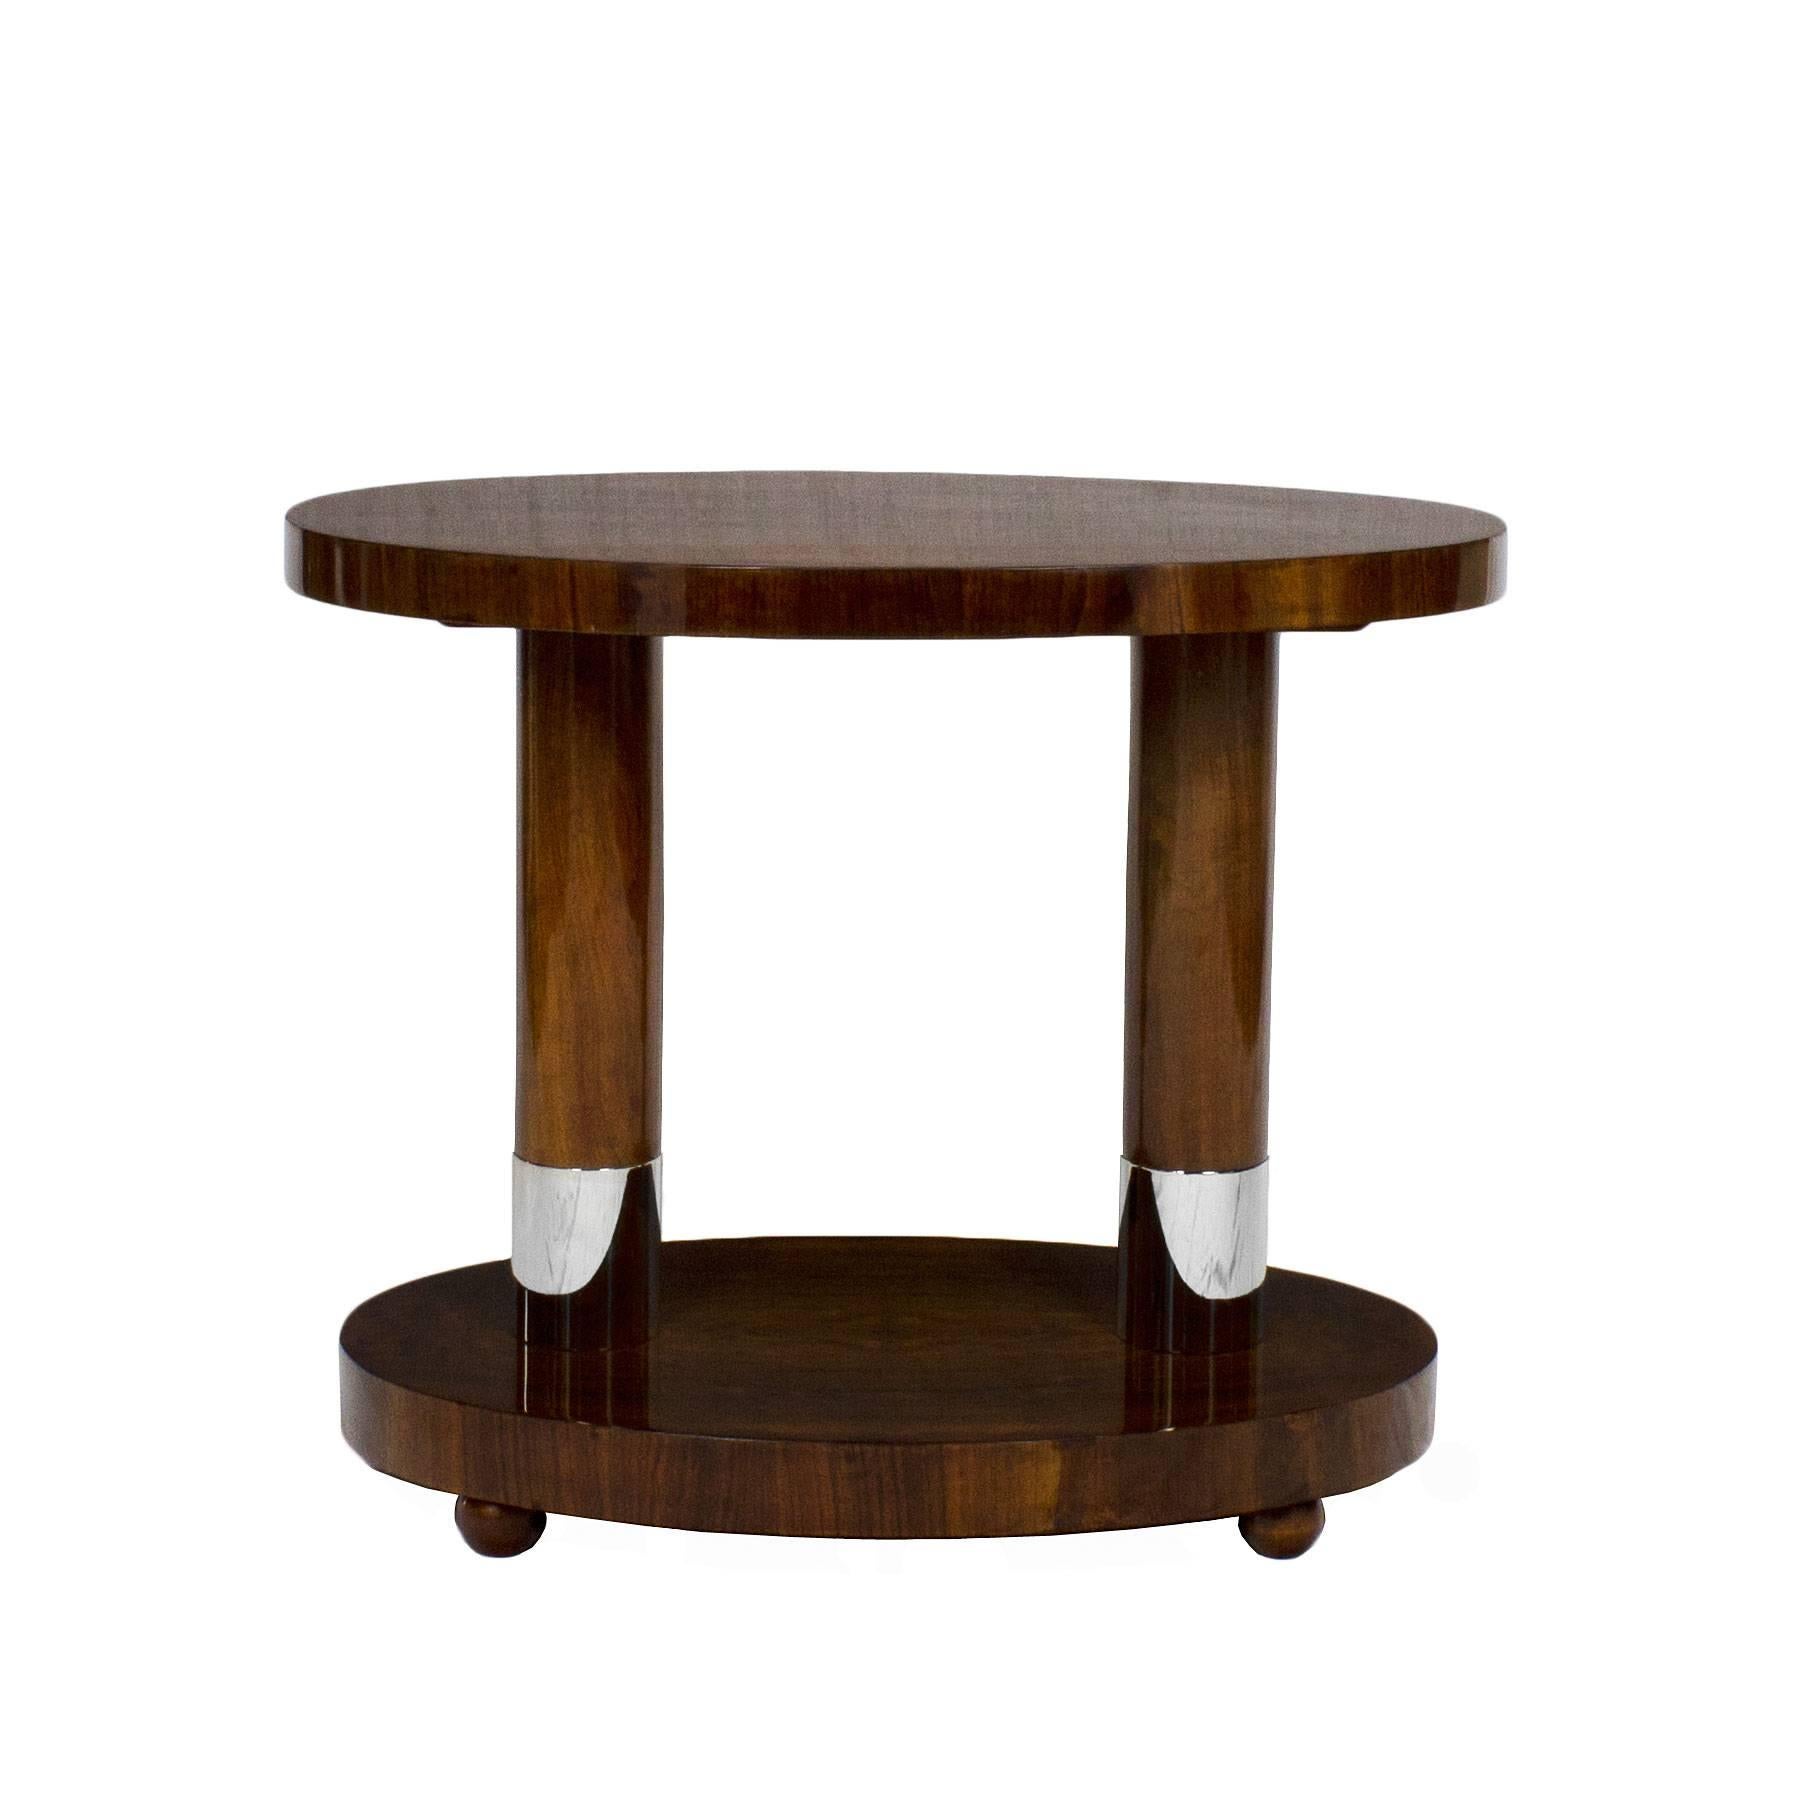 Splendid oval sidetable with 4 rounded feet, 2 solid walnut stands with nickel plated brass bases. Really nice walnut veneer on top.

France c. 1940